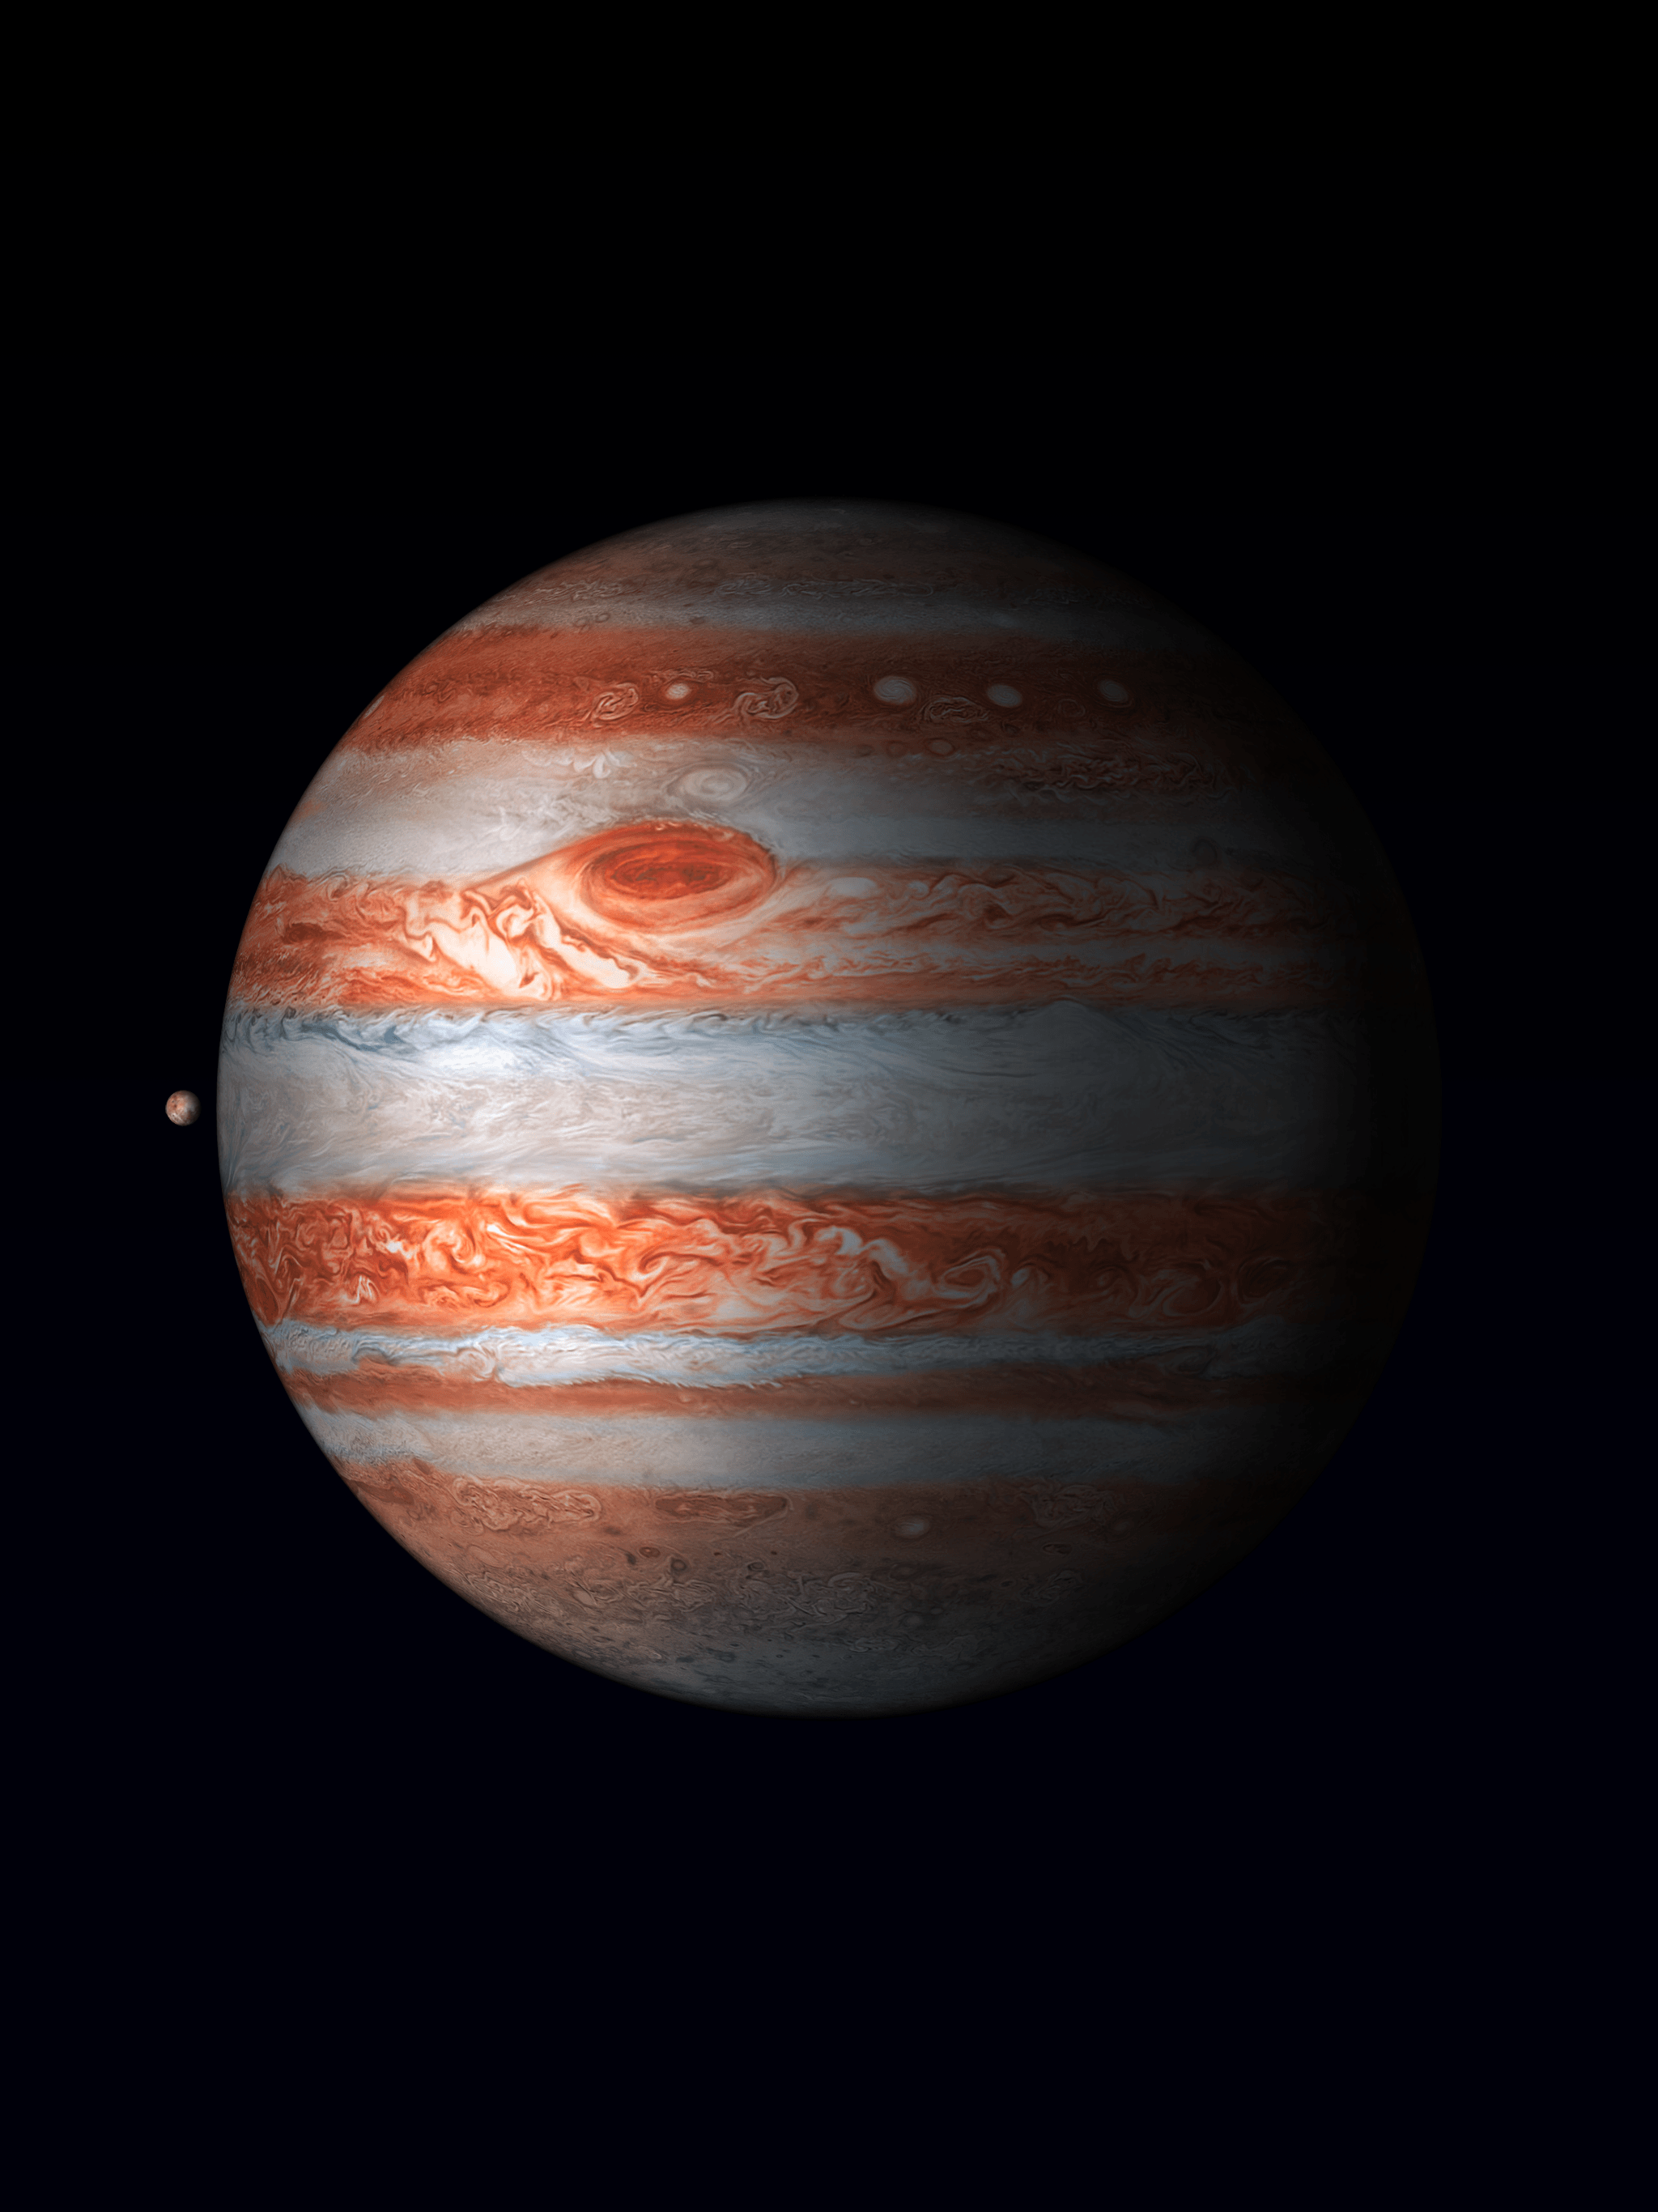 iPad Pro Jupiter wallpaper for iPhone 6 and iPhone 6 Plus